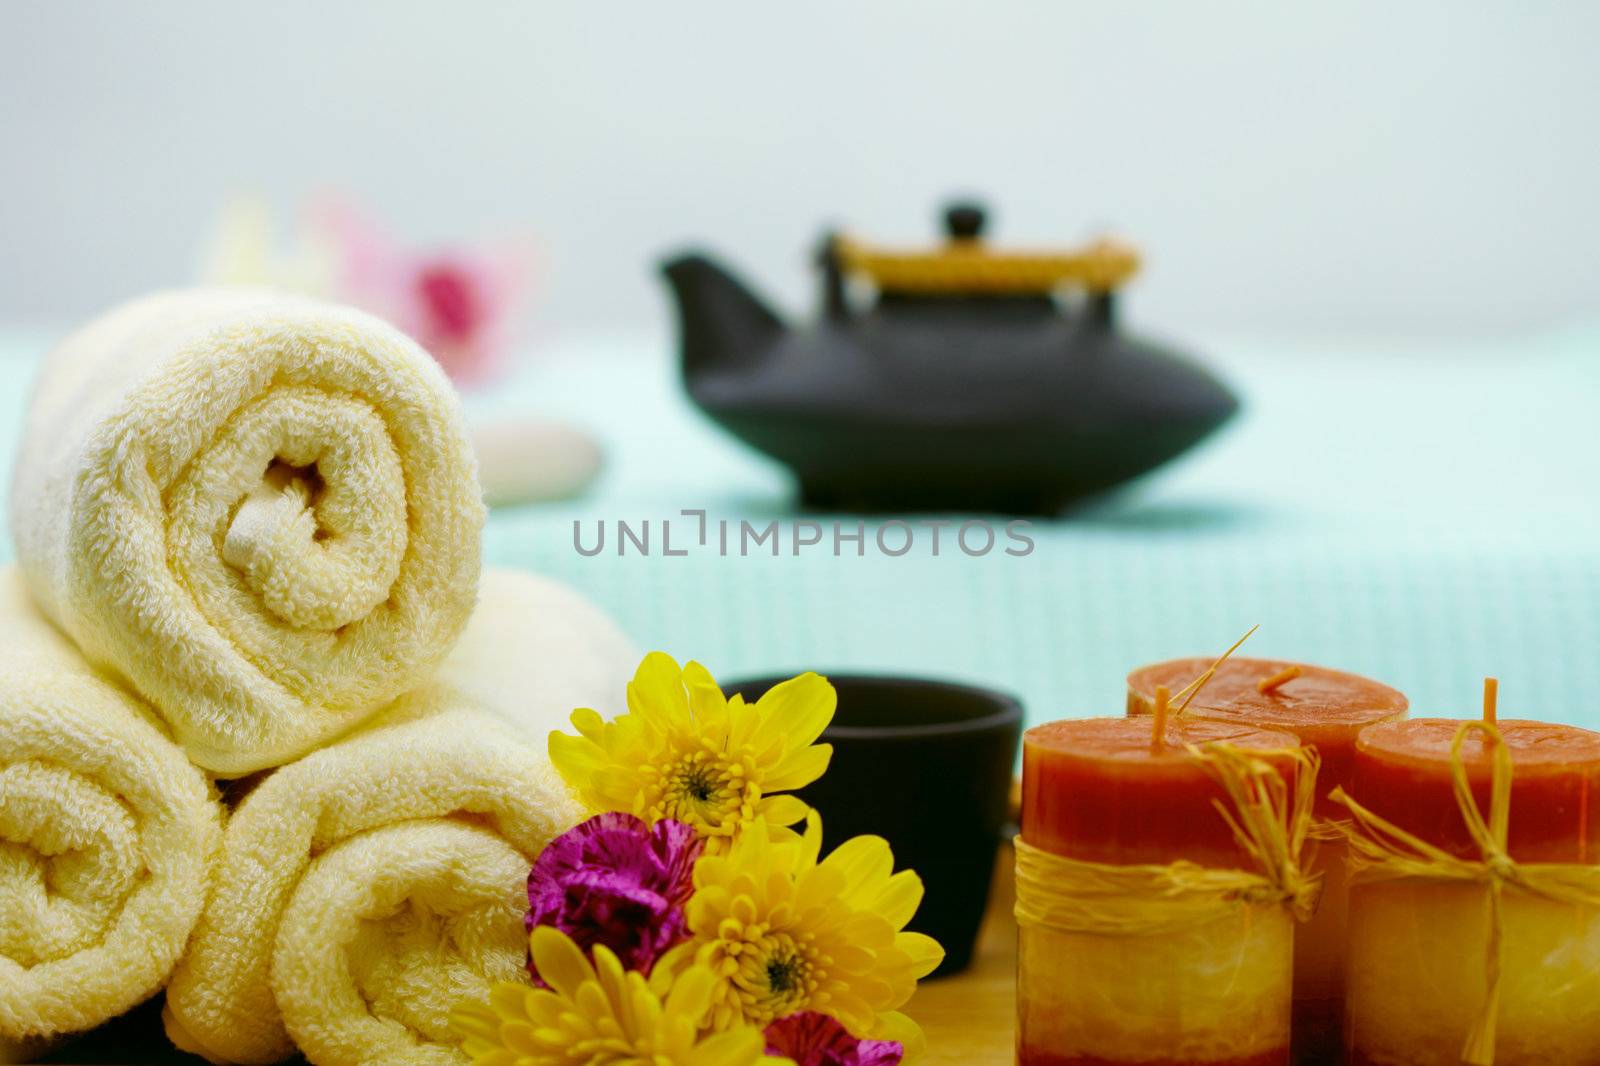 The composition of teapot, towels and candles - spa